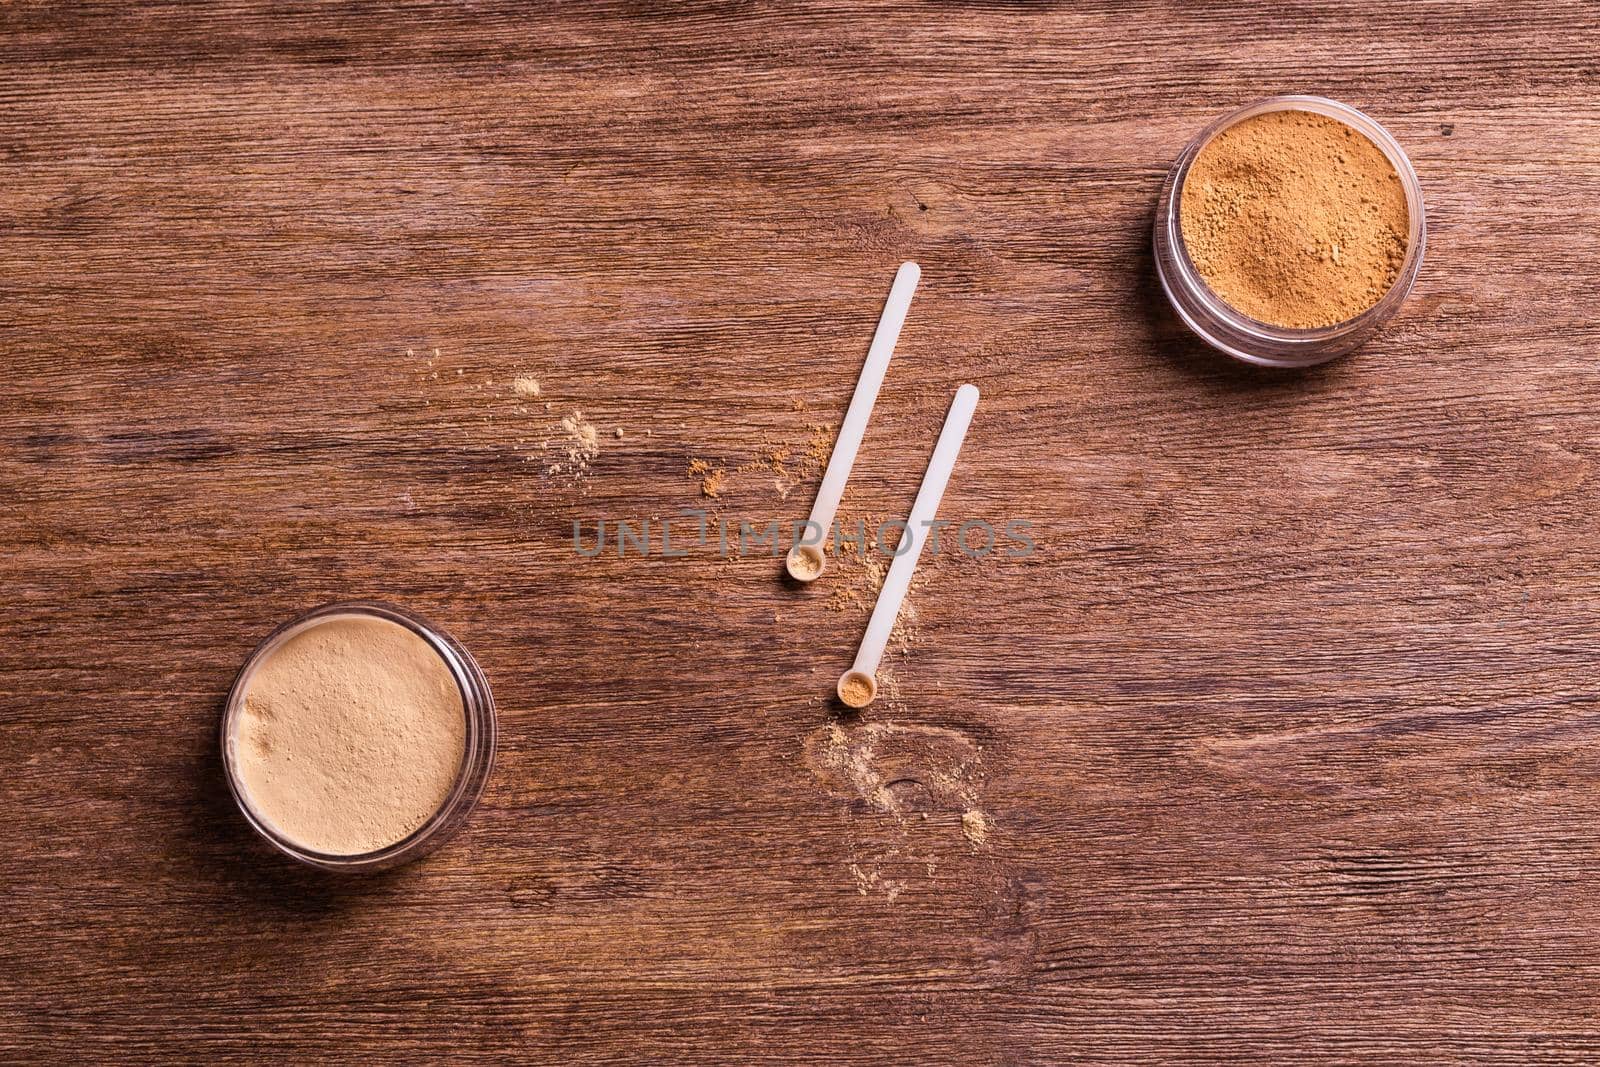 Mineral powder of different colors with spoon dispenser for make-up on wooden background.